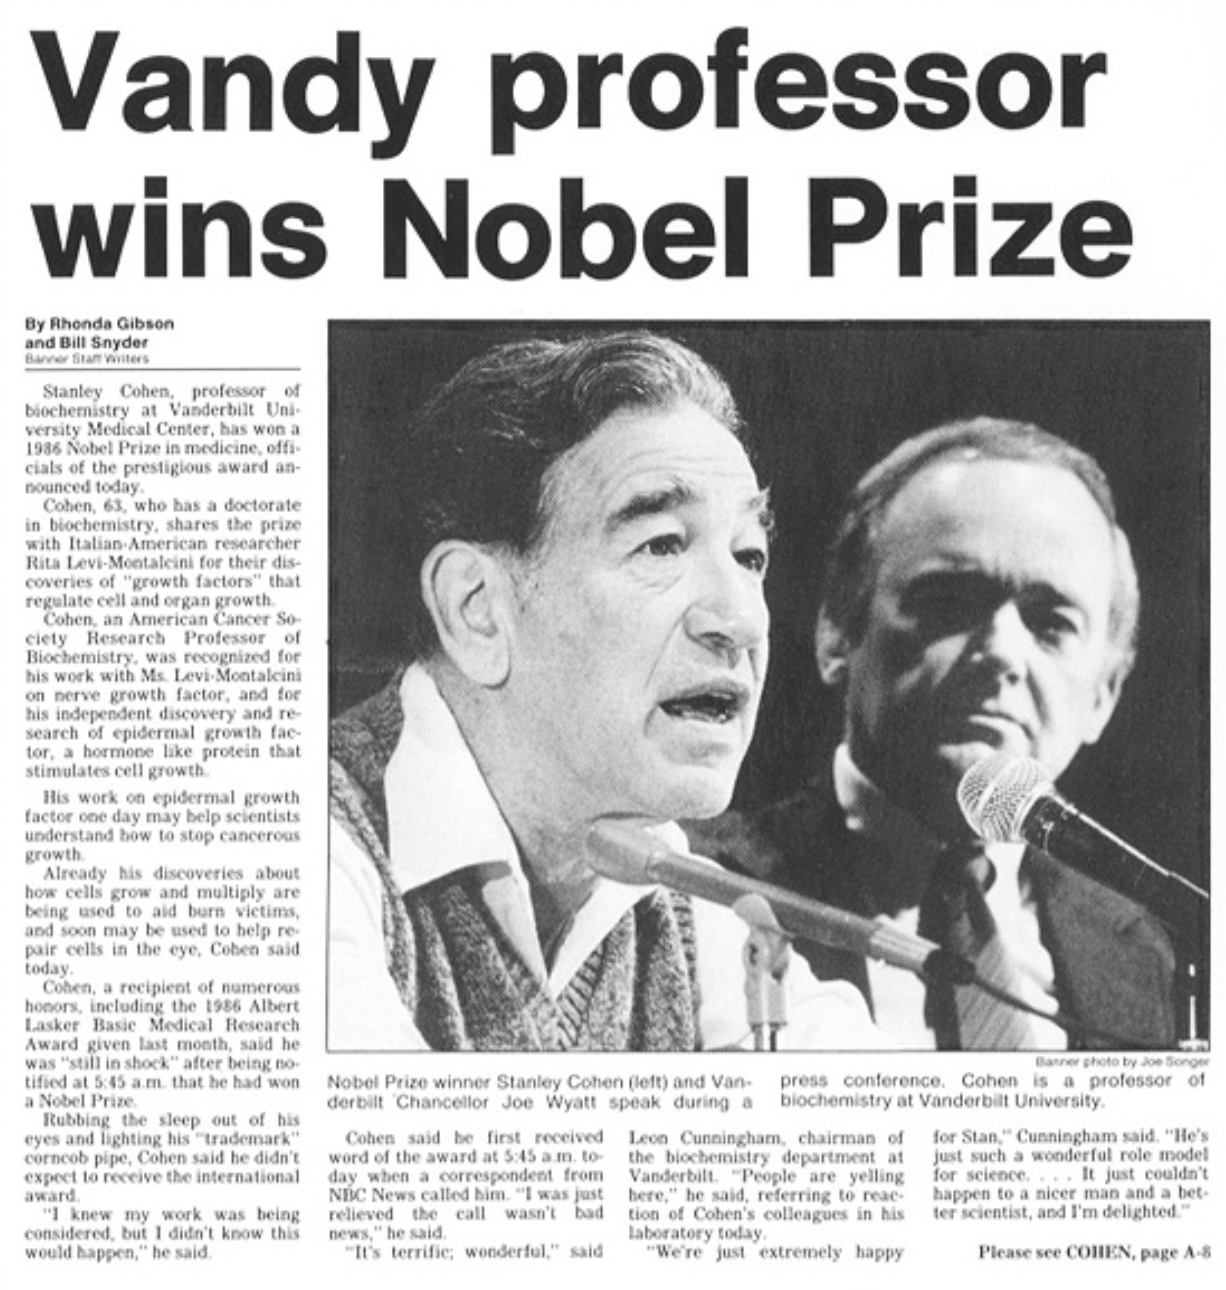 News article of Stanley Cohen winning Nobel Prize featuring a black-and-white photo of Dr. Cohen (left) and Vanderbilt Chancellor Joe Wyatt (right).